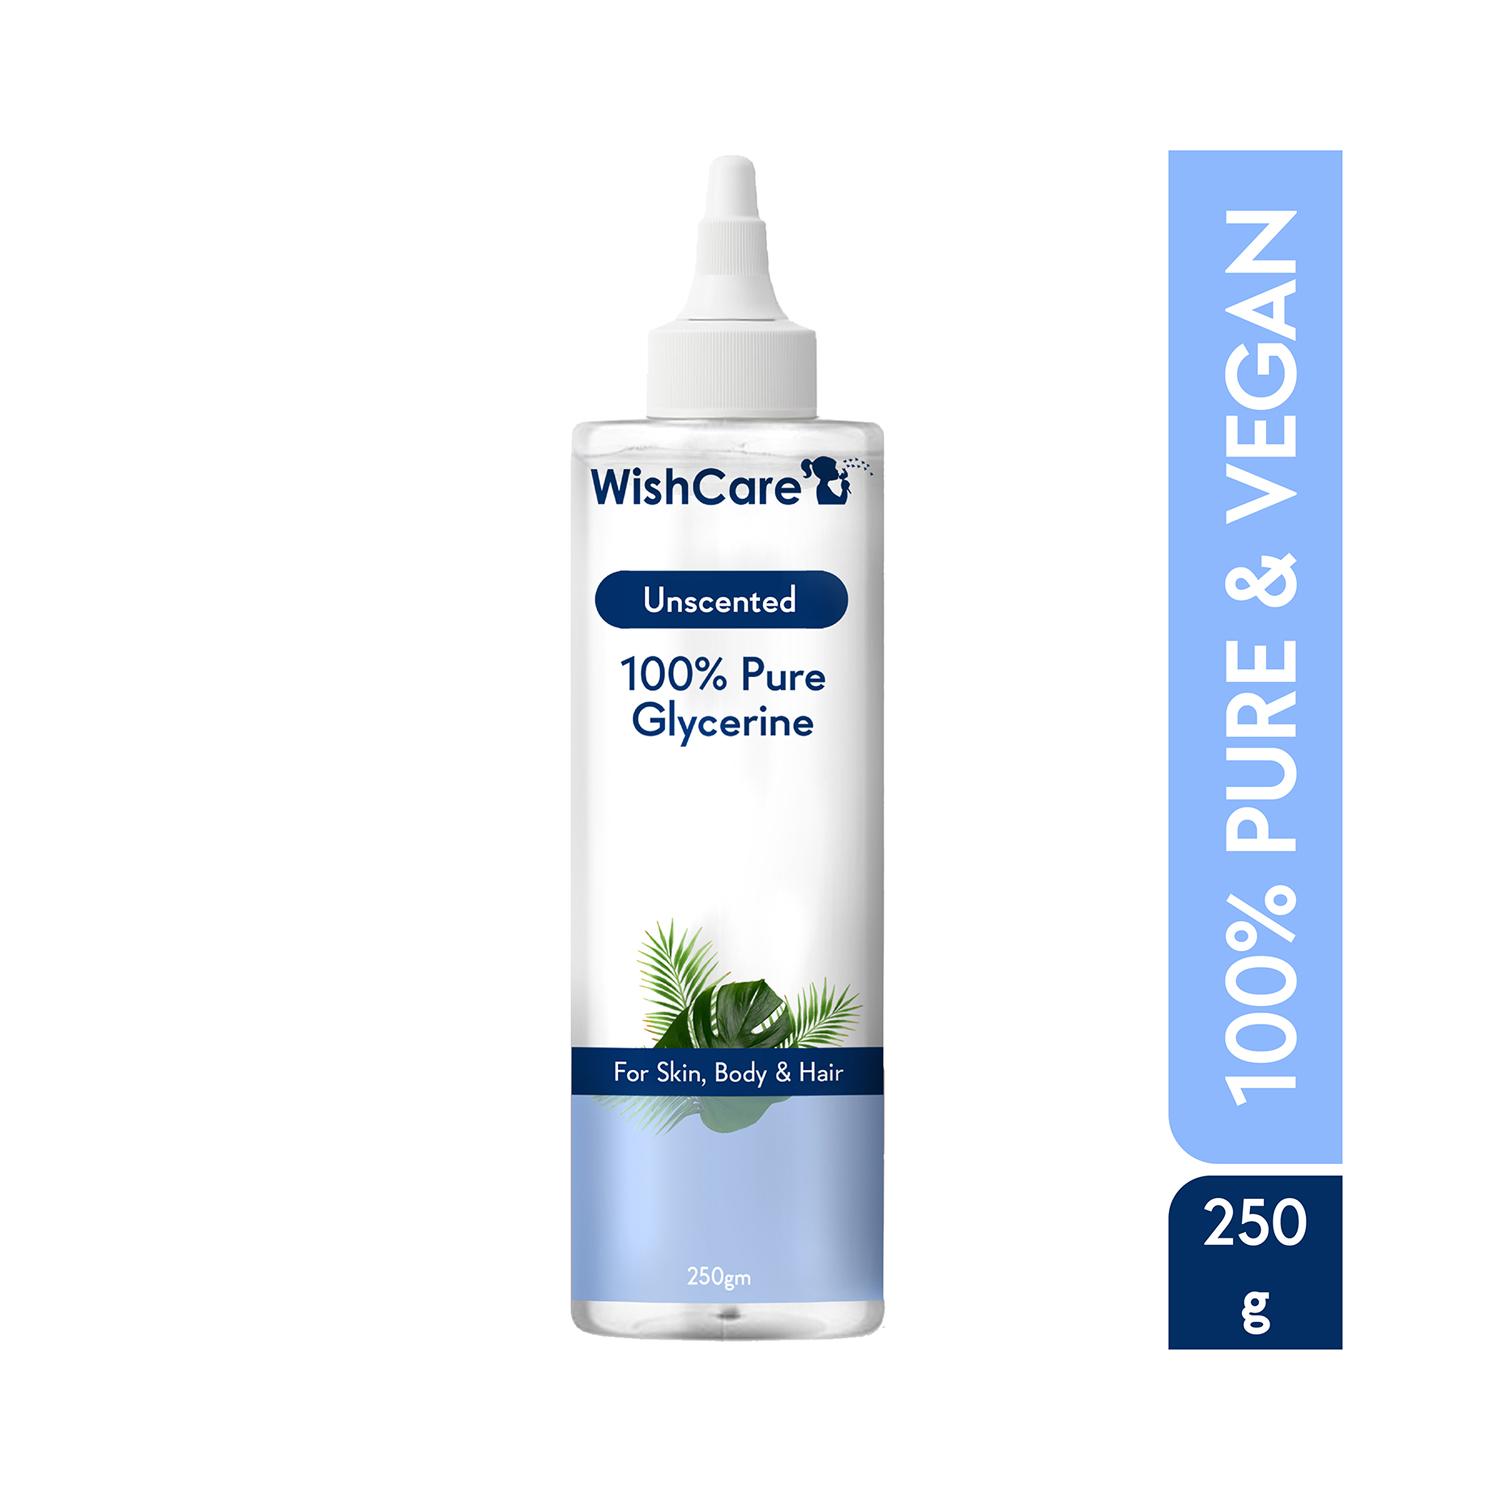 WishCare Pure & Unscented Glycerin (250g)